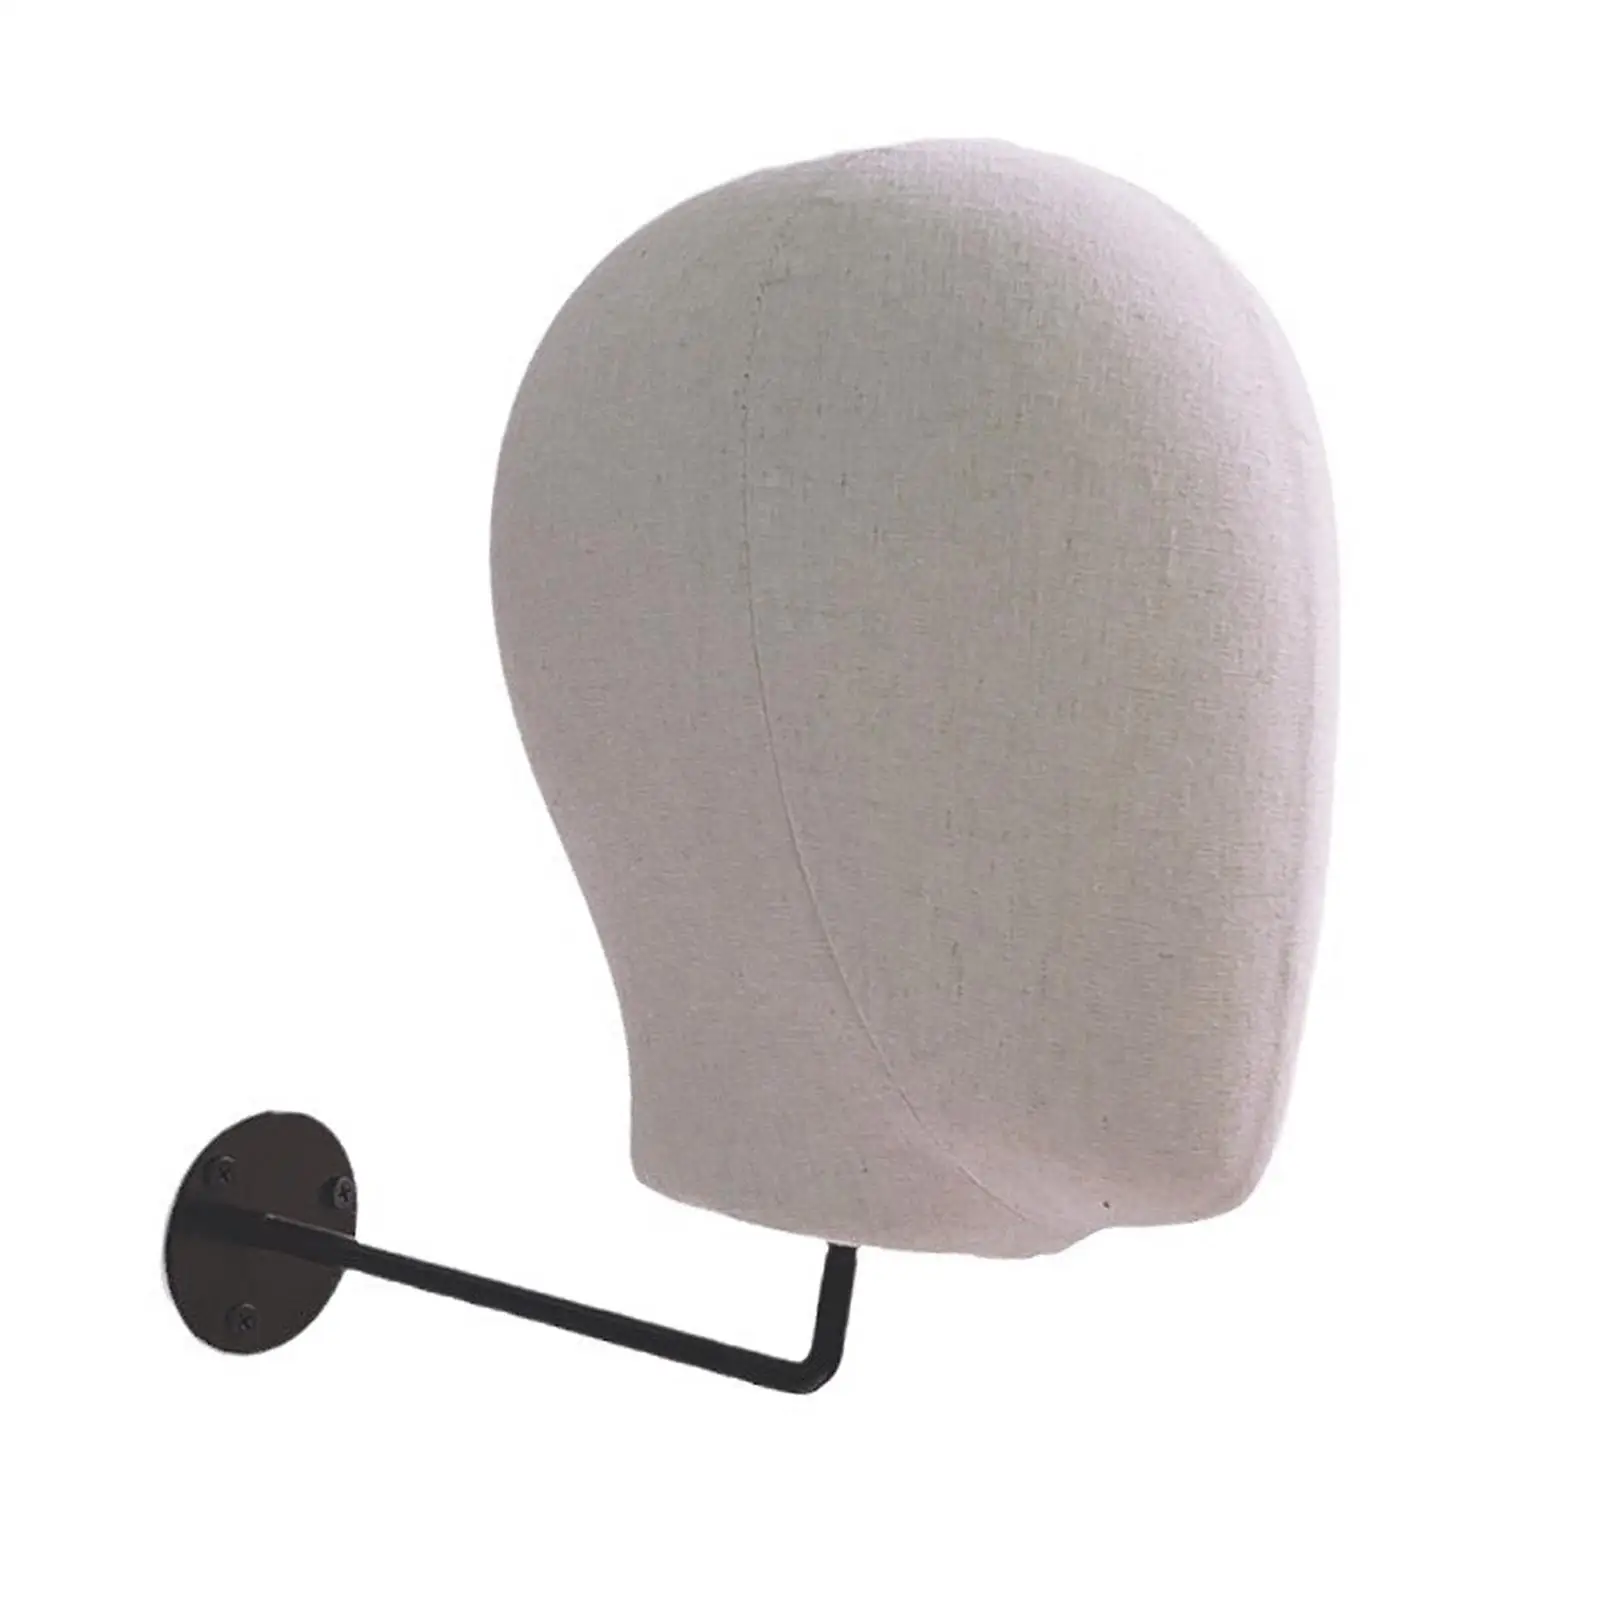 

Wig Head Holder,Mannequin Head Stand Wall Mount for Hats Cap Salon Display Rack for Hairdresser Shopping Mall Prop Wig Making